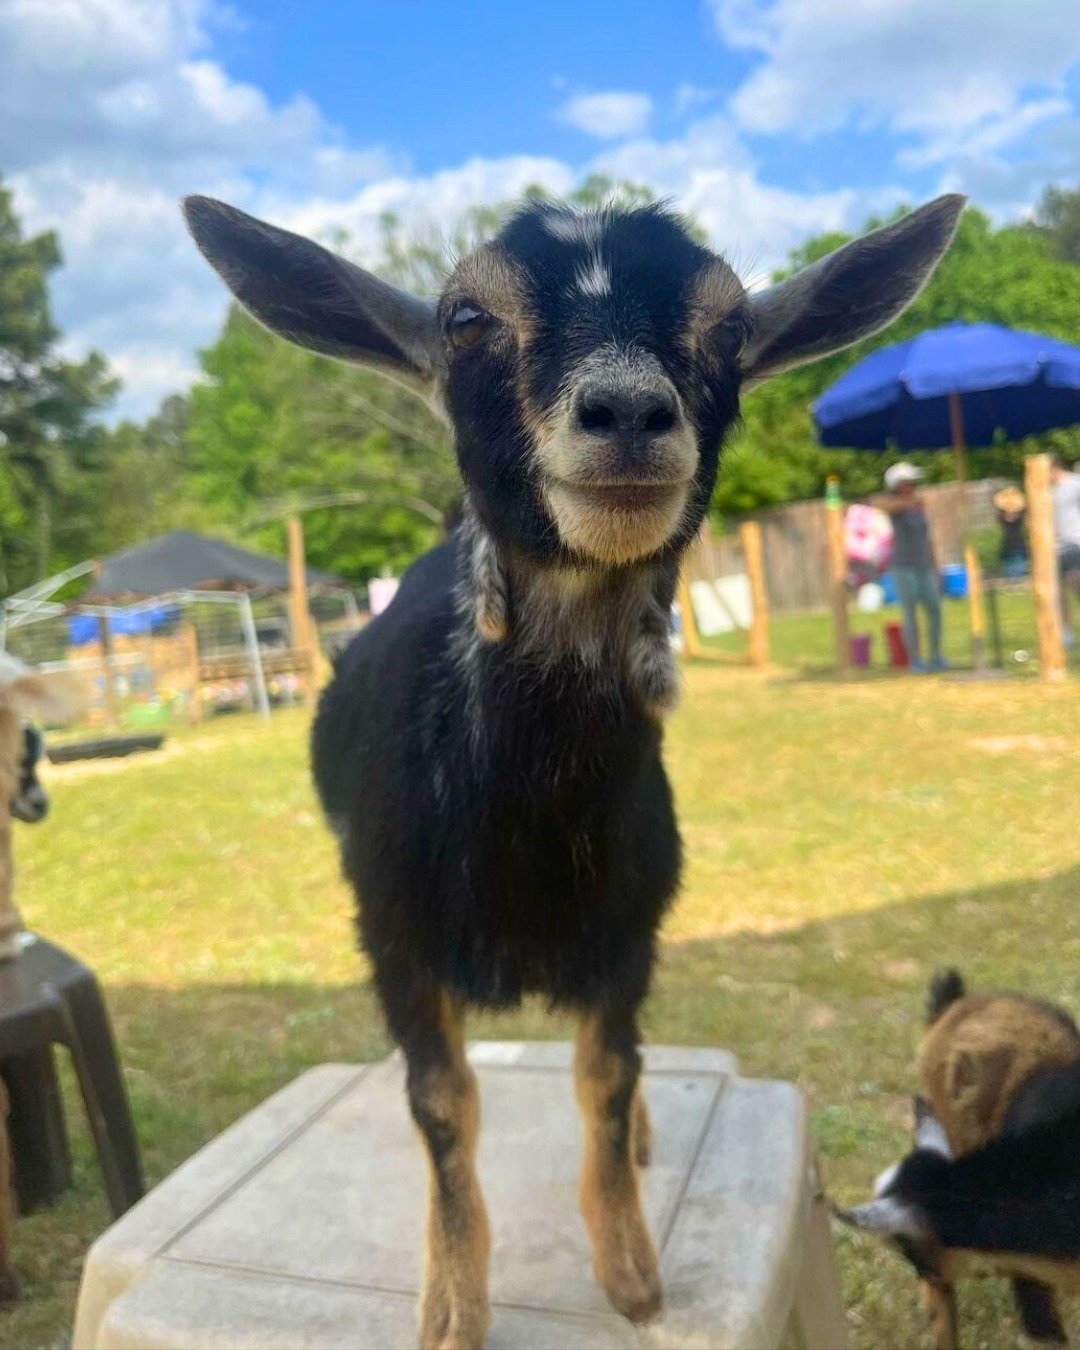 What better way to start your weekend than with these adorable furry faces?😍Swipe to meet and learn more about them all below.👇

Minnie from @lamberts.family.farm 🐐Apex, NC
Mindy from @landofmilkandhoneyfarms_llc 🦙Deep Gap, NC
Cute calf from @bro